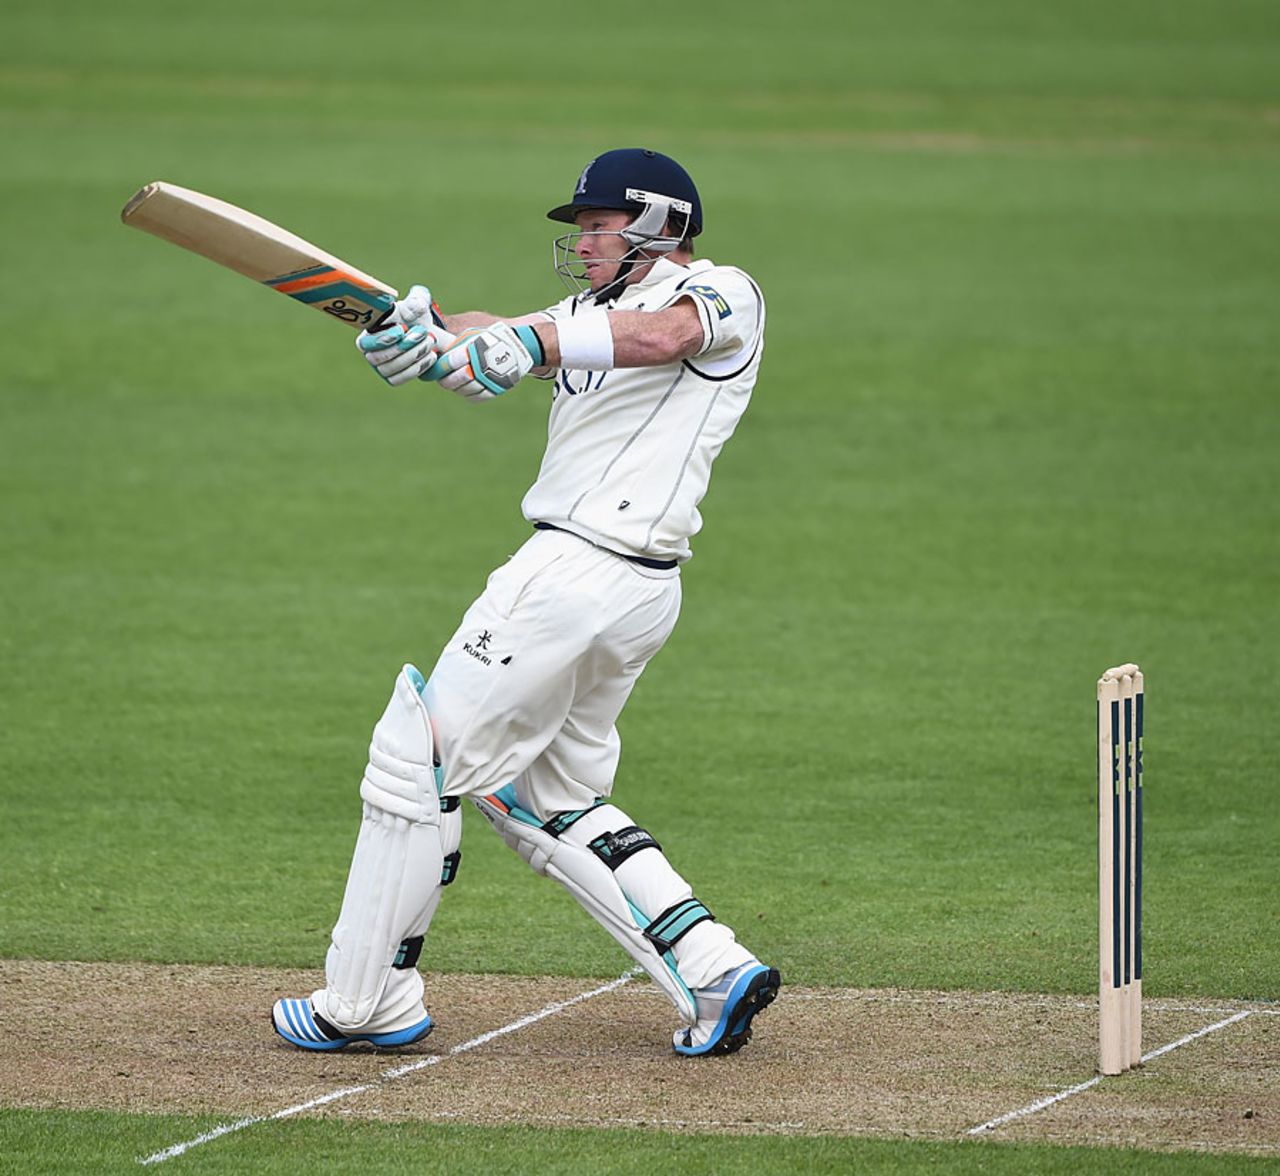 Ian Bell survived an early drop to score his second hundred of the season, Nottinghamshire v Warwickshire, County Championship, Division One, Trent Bridge, April 27, 2014